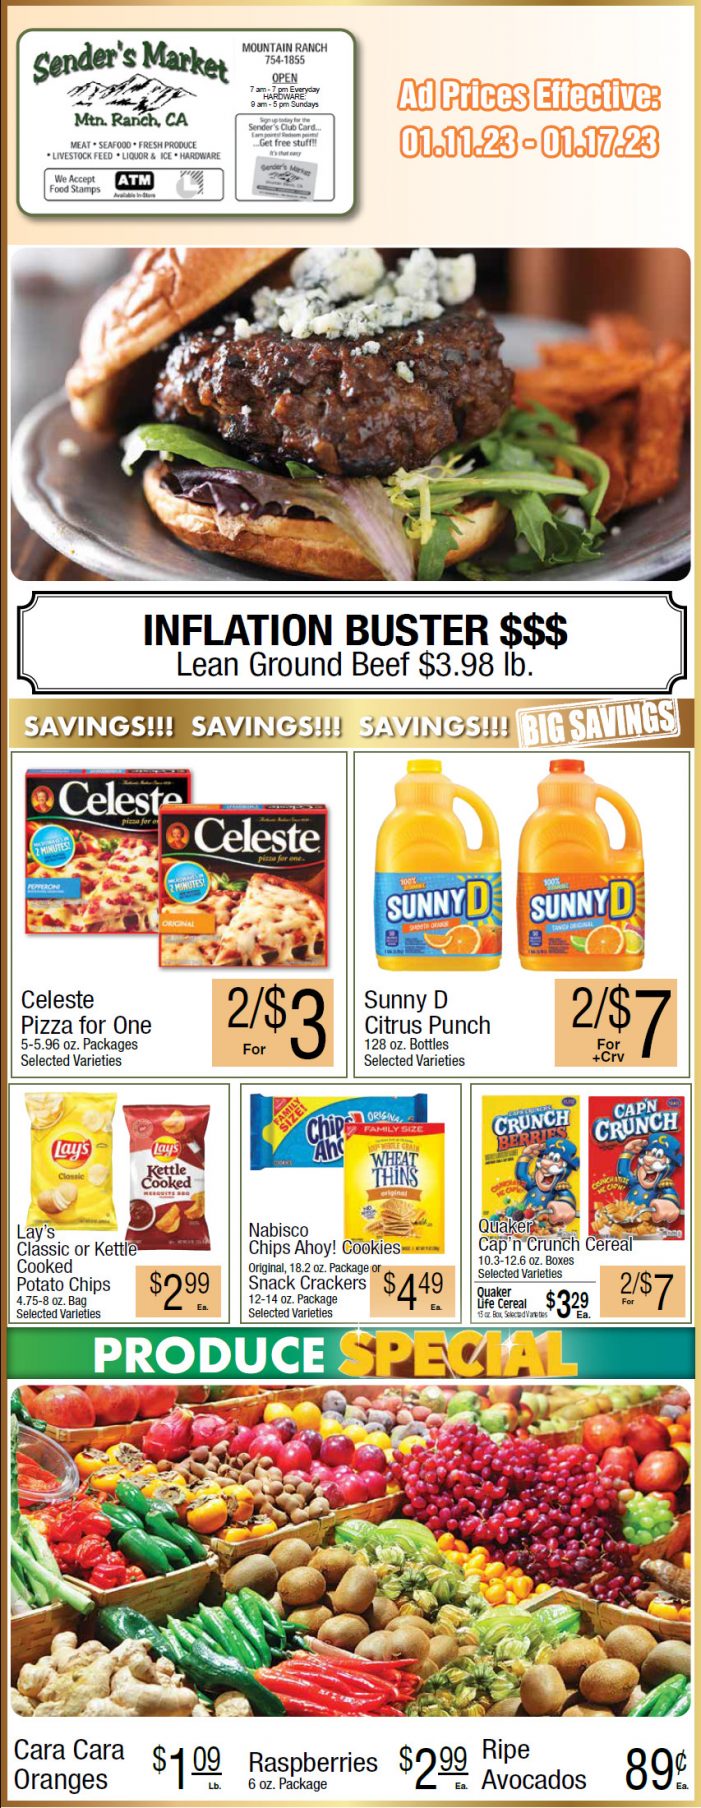 Sender’s Market Weekly Ad & Grocery Specials Jan 11 – 17th! Inflation Buster Lean Ground Beef Only $3.98lb!